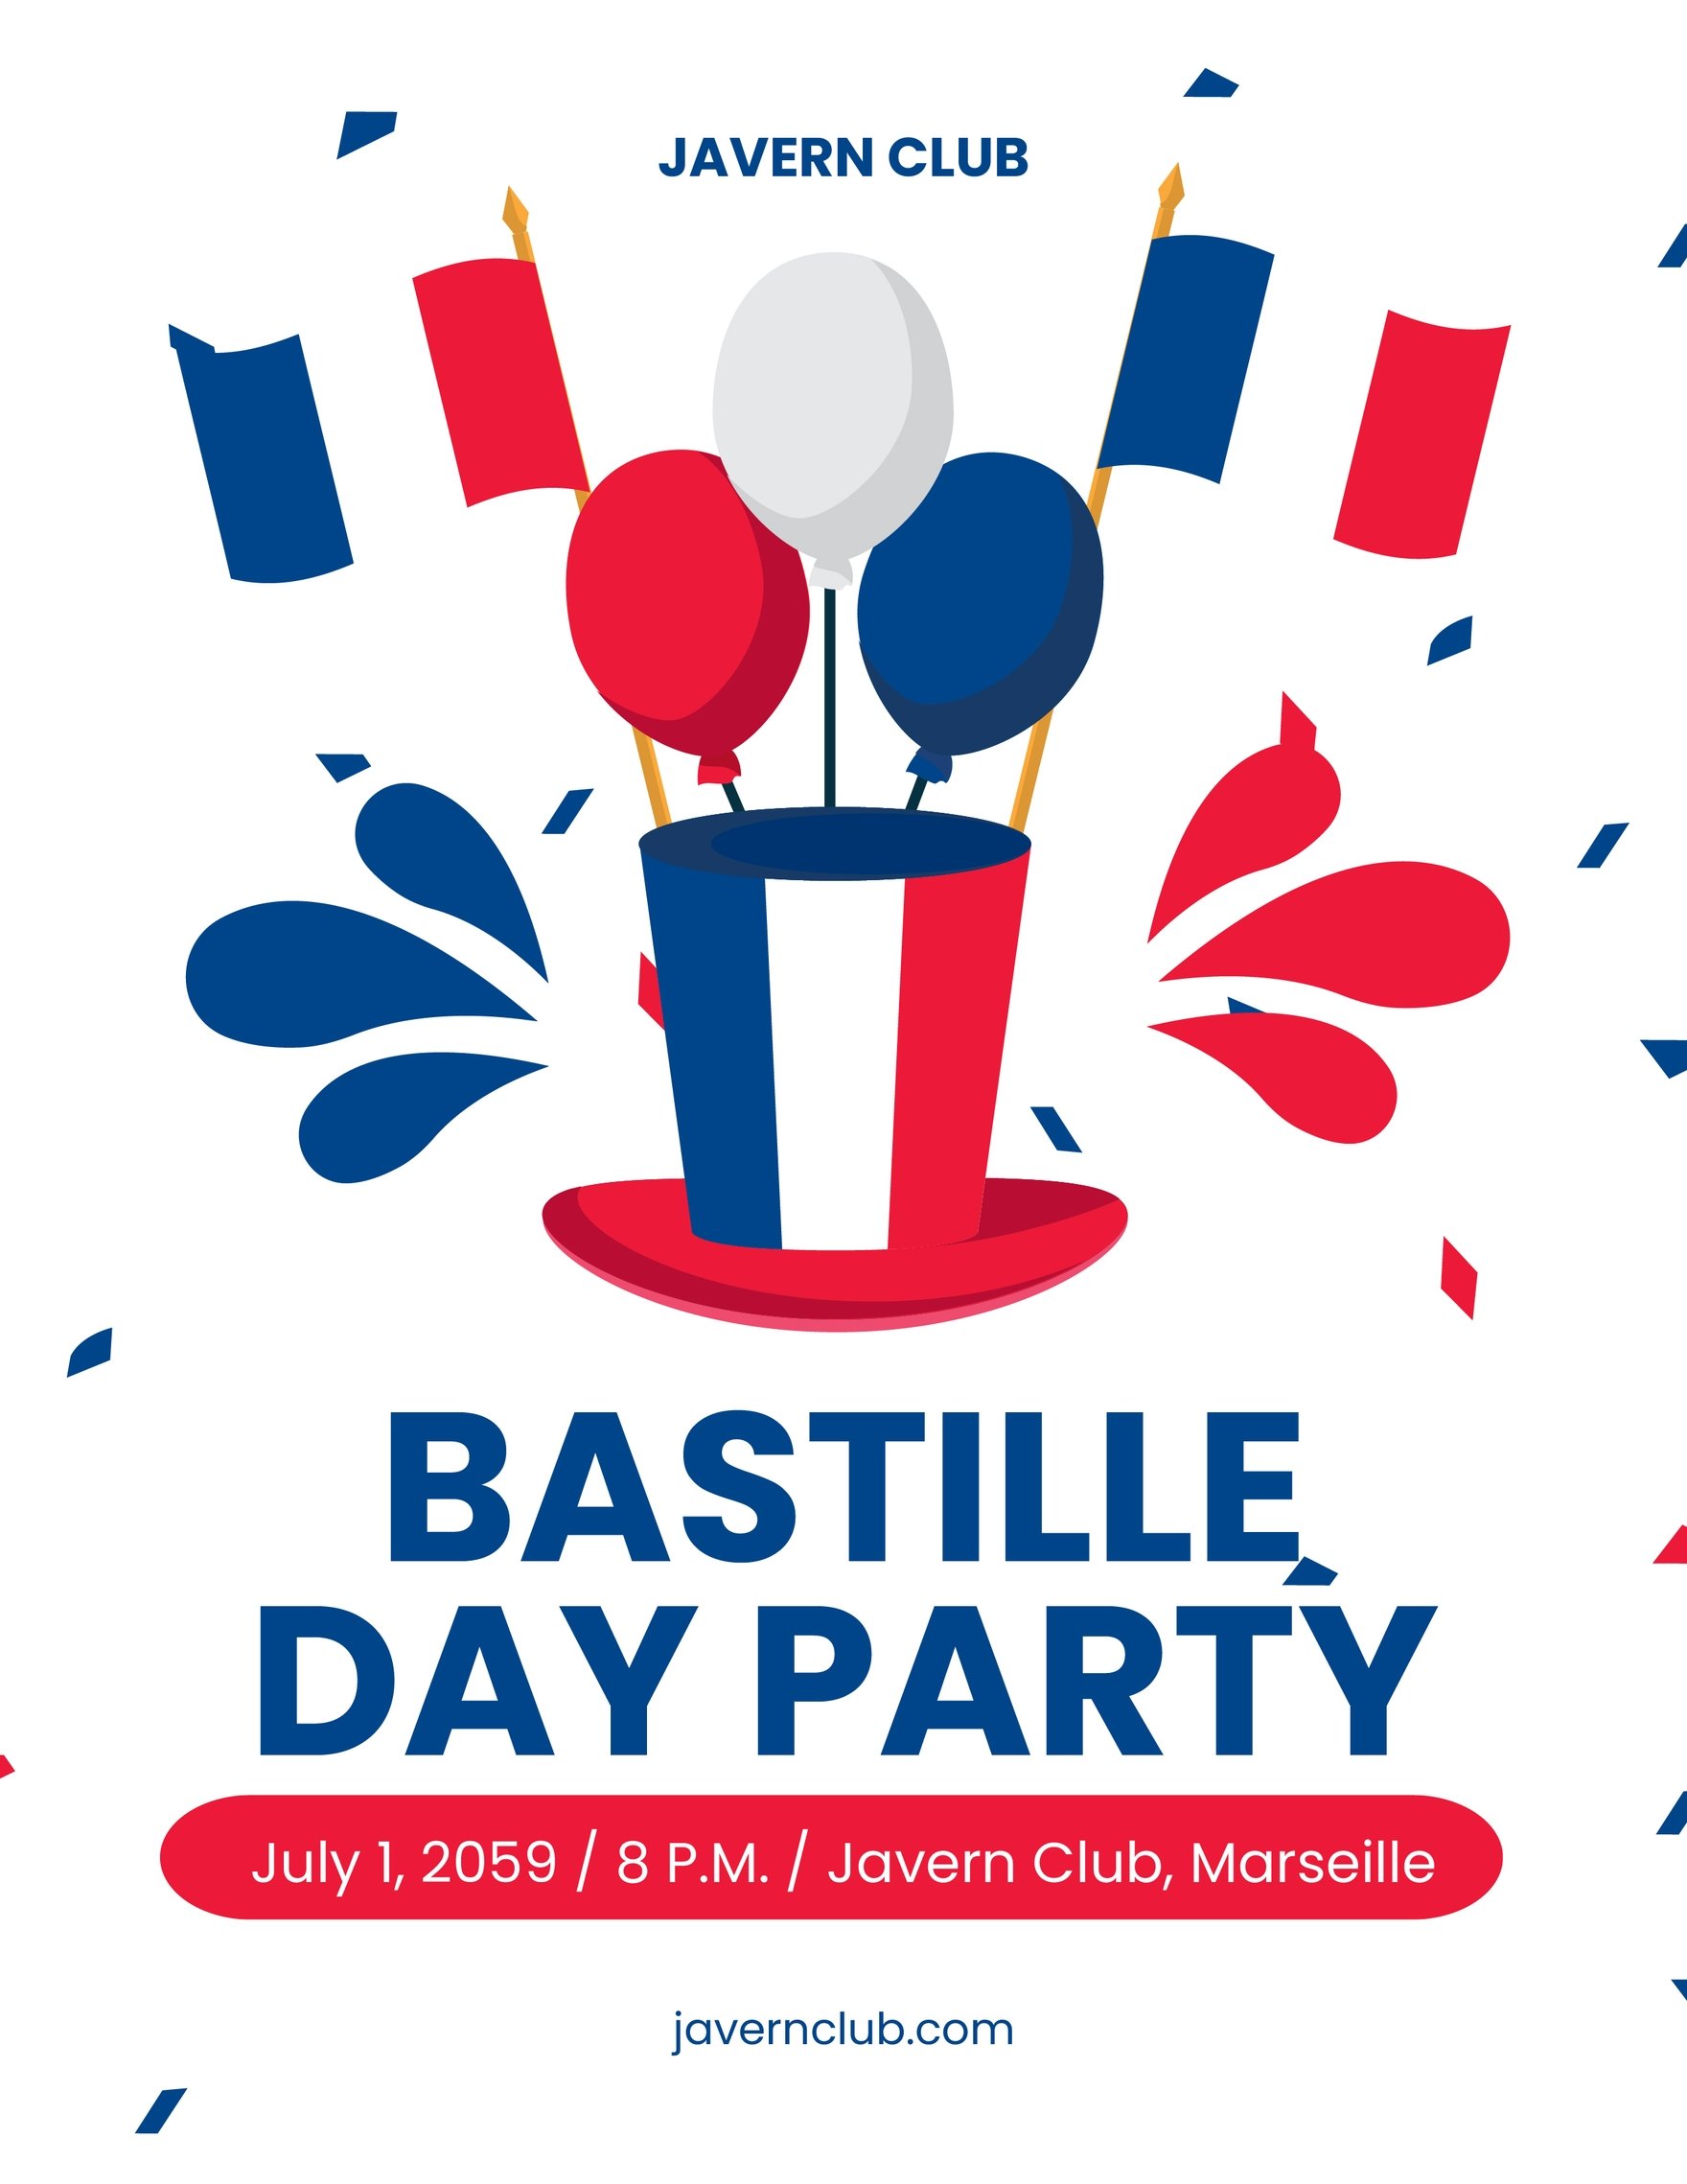 Bastille Day Party Flyer in Word, Google Docs, Illustrator, PSD, Apple Pages, Publisher